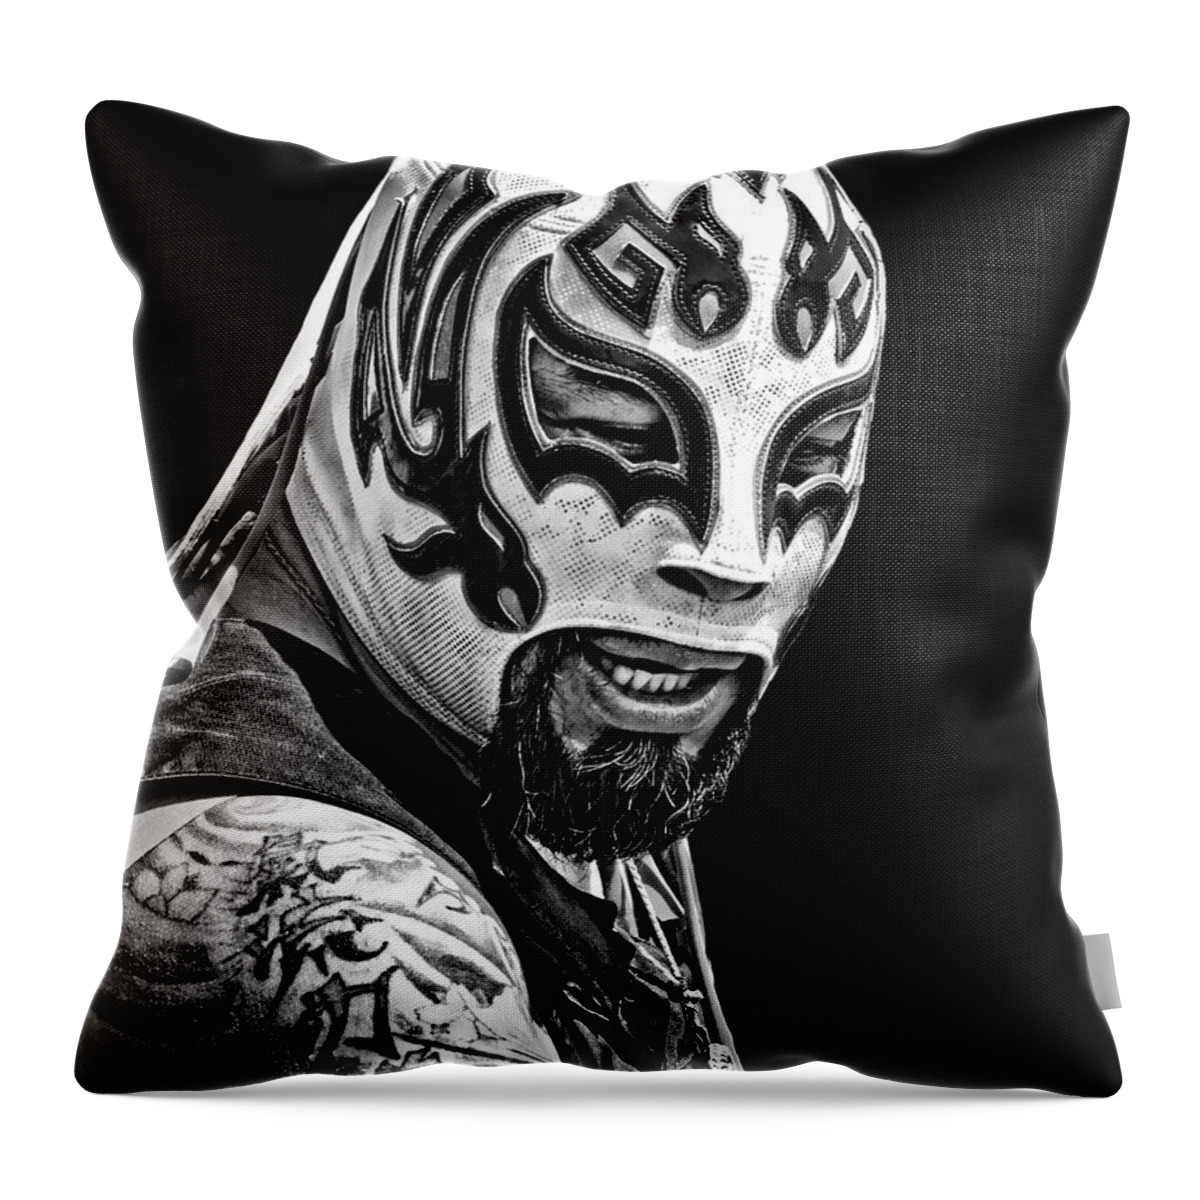 Masked Luchador Throw Pillow featuring the photograph Masked Luchador Estilo Rudo black and white version by Jim Fitzpatrick